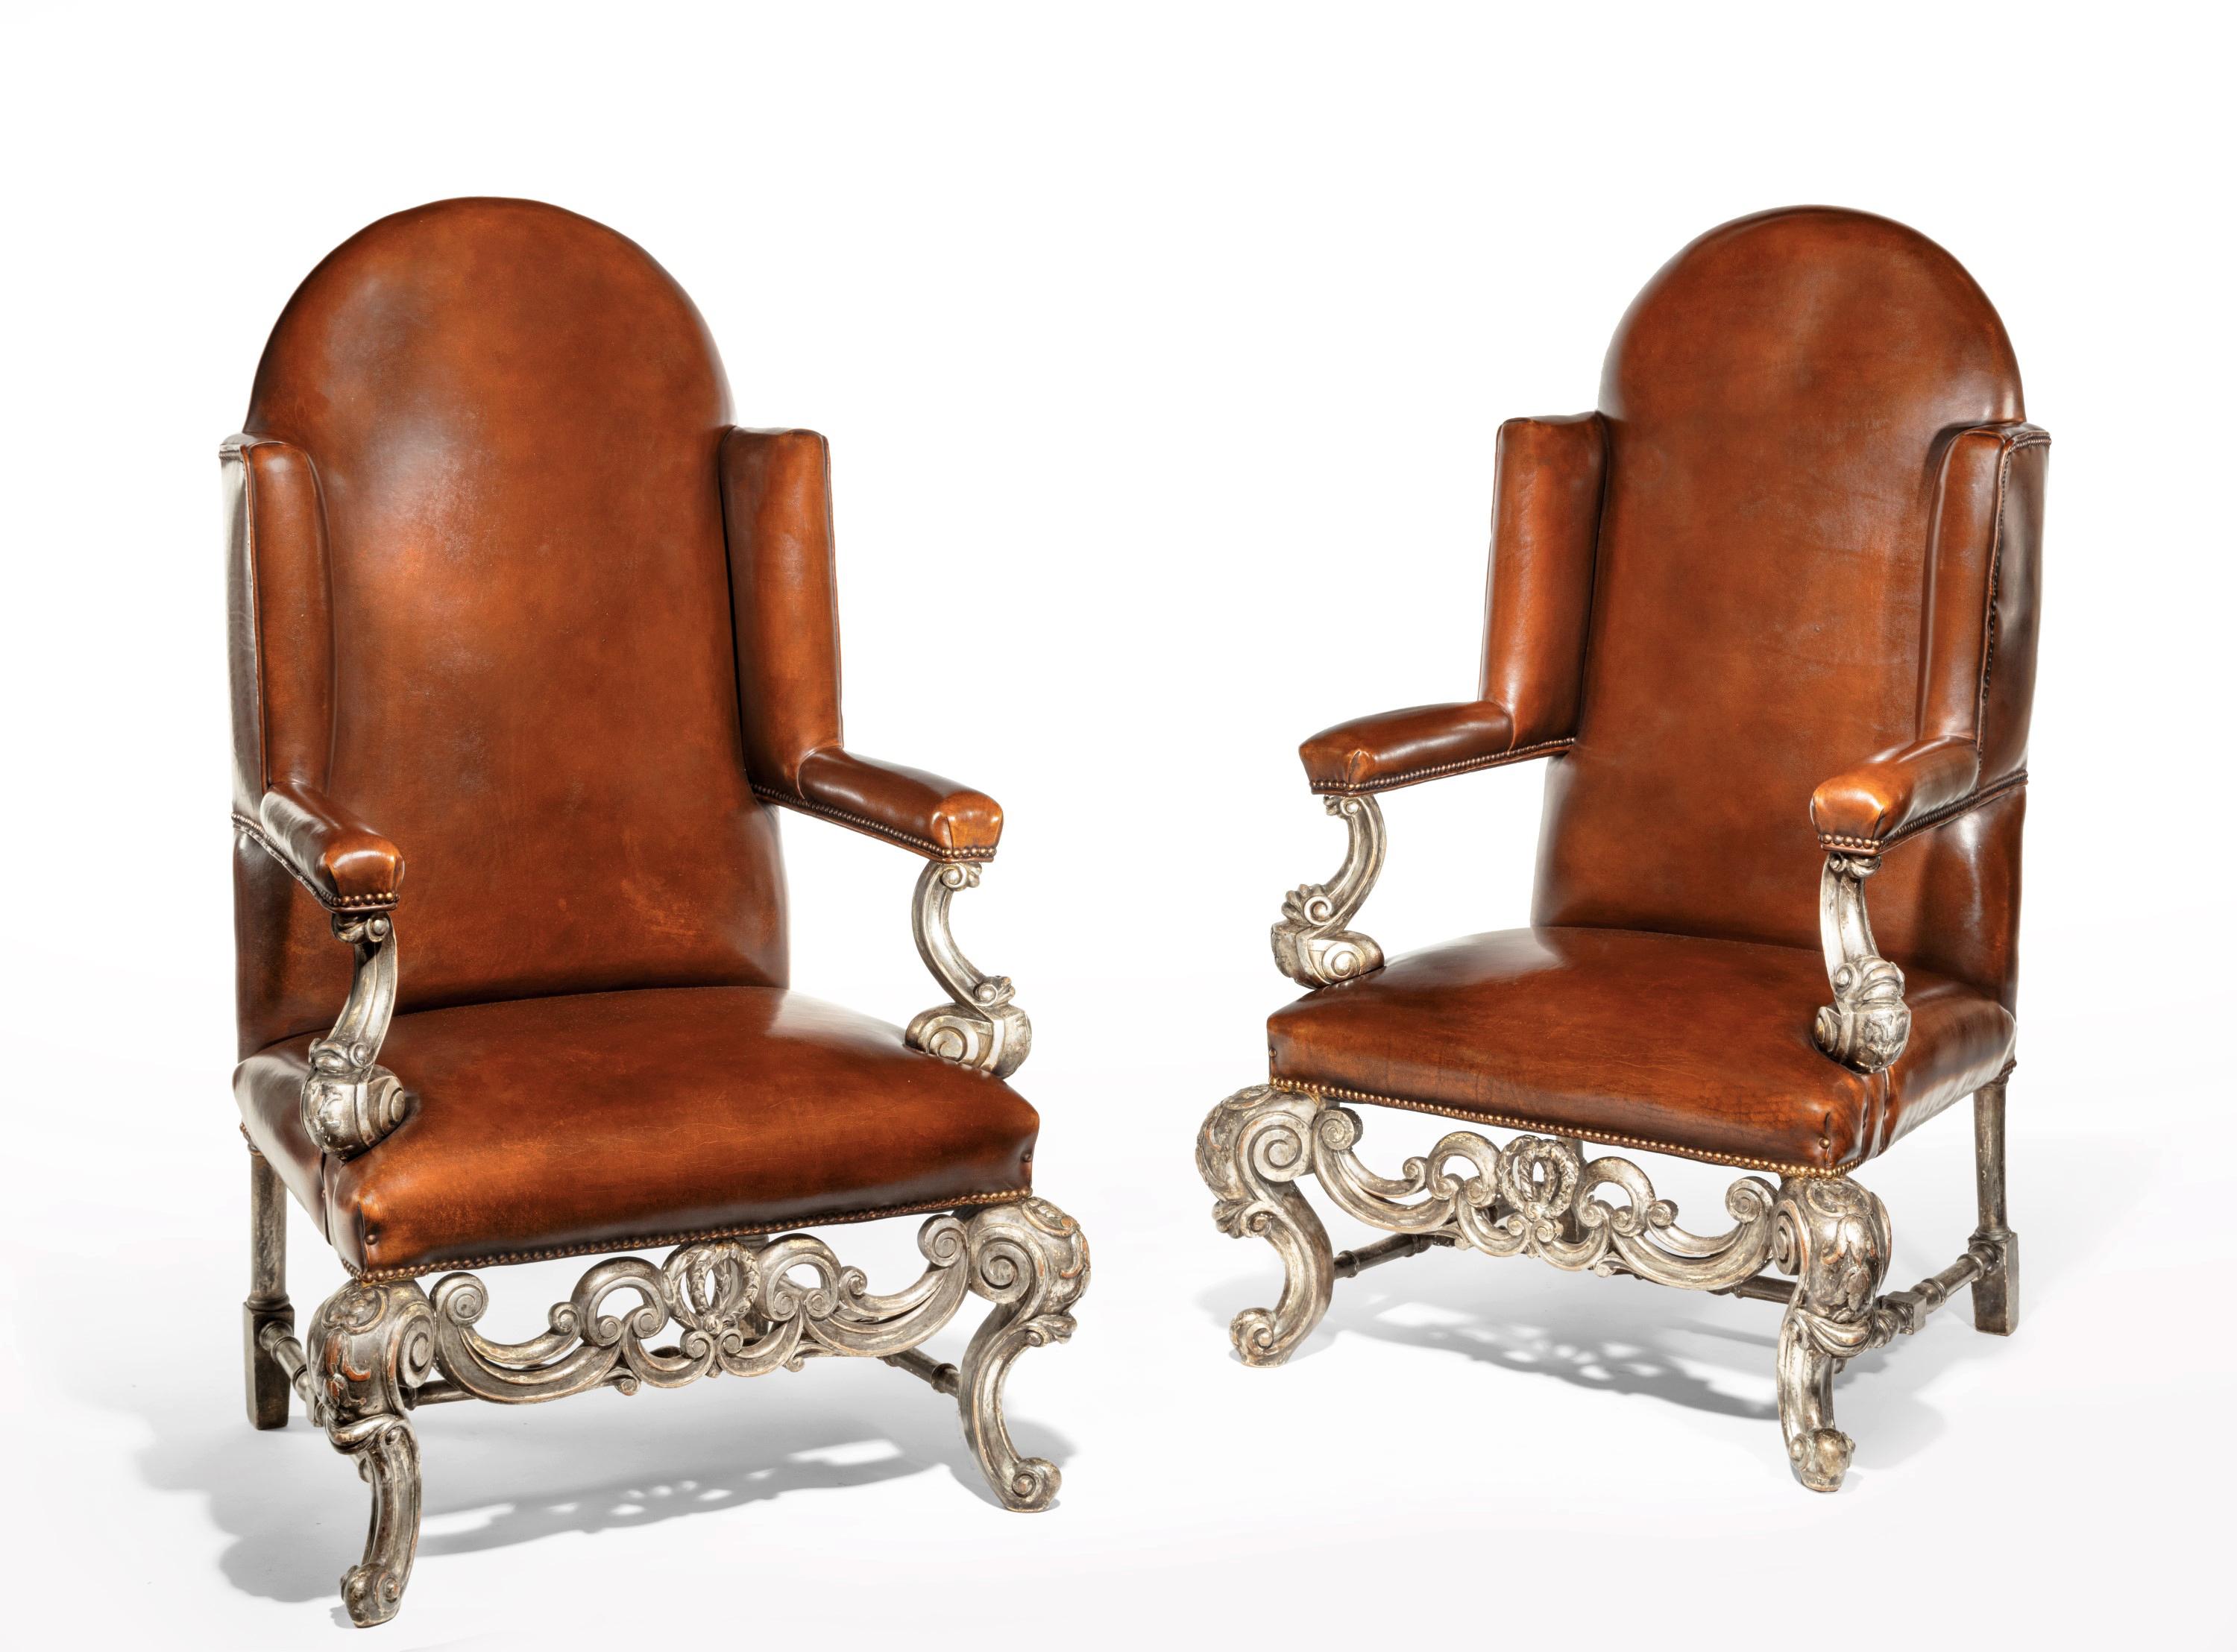 Victorian Antique Pair of Silver Gilt Leather Upholstered Wing Chairs